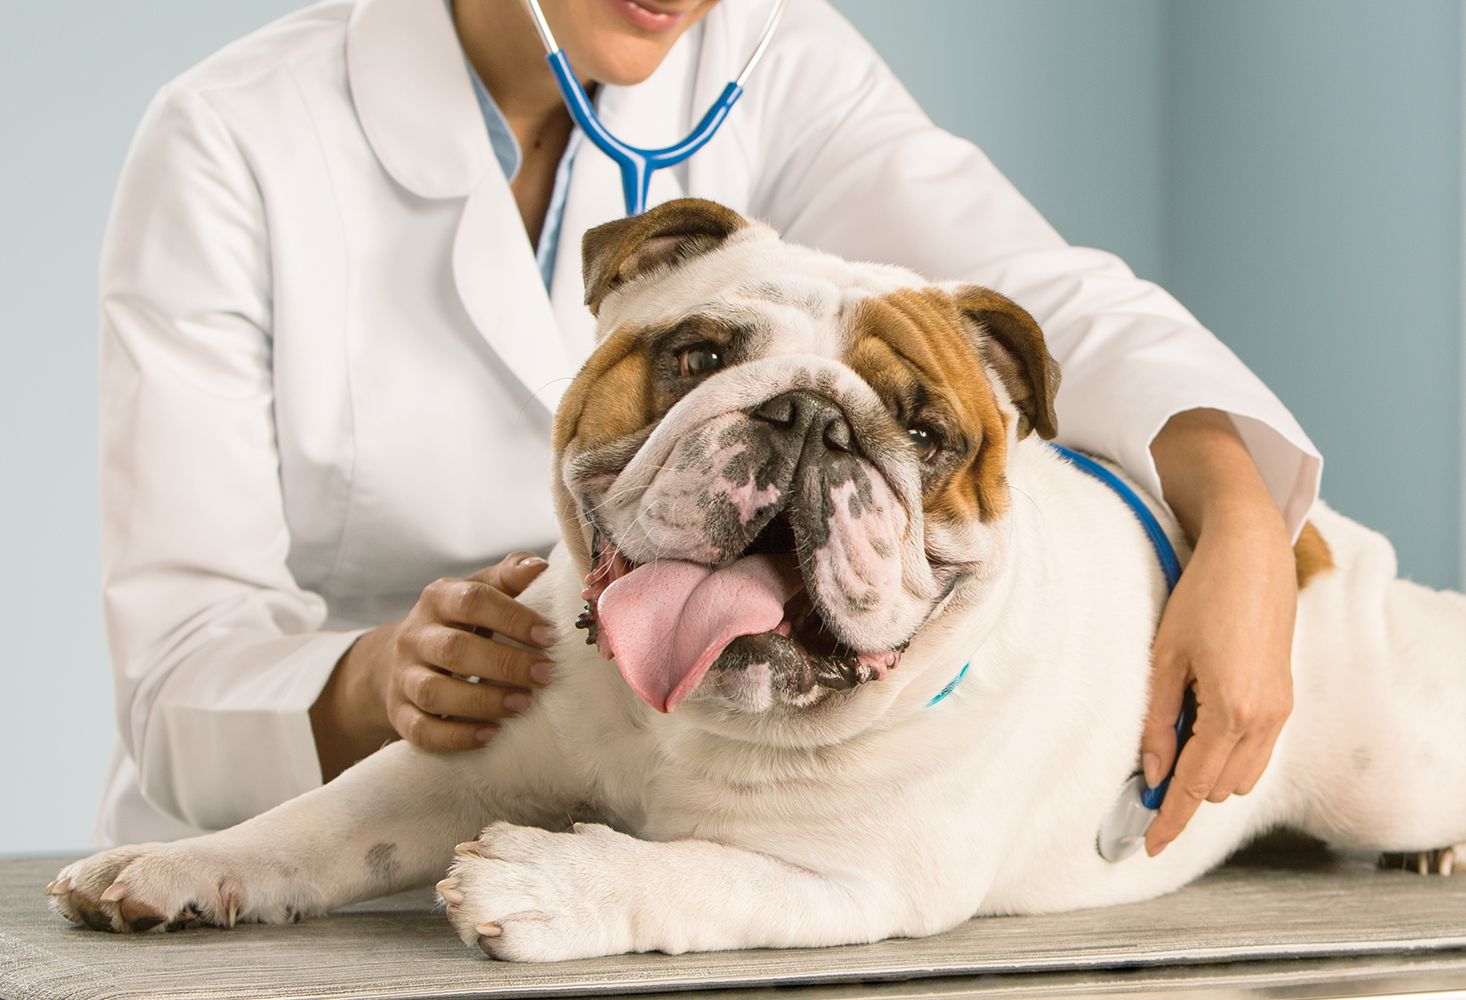 doctor for pets